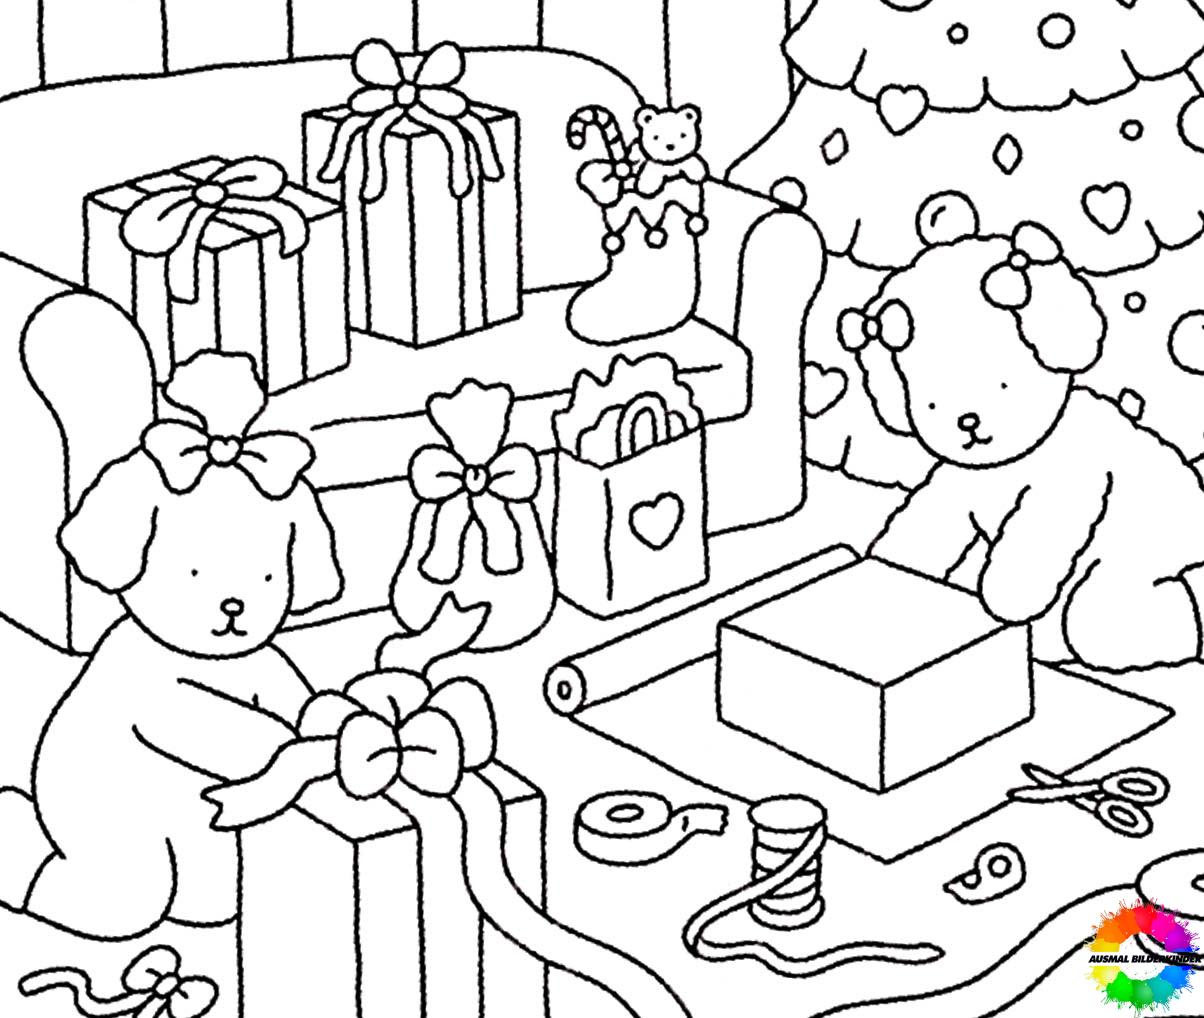 bobbie goods  Hello kitty colouring pages, Coloring book art